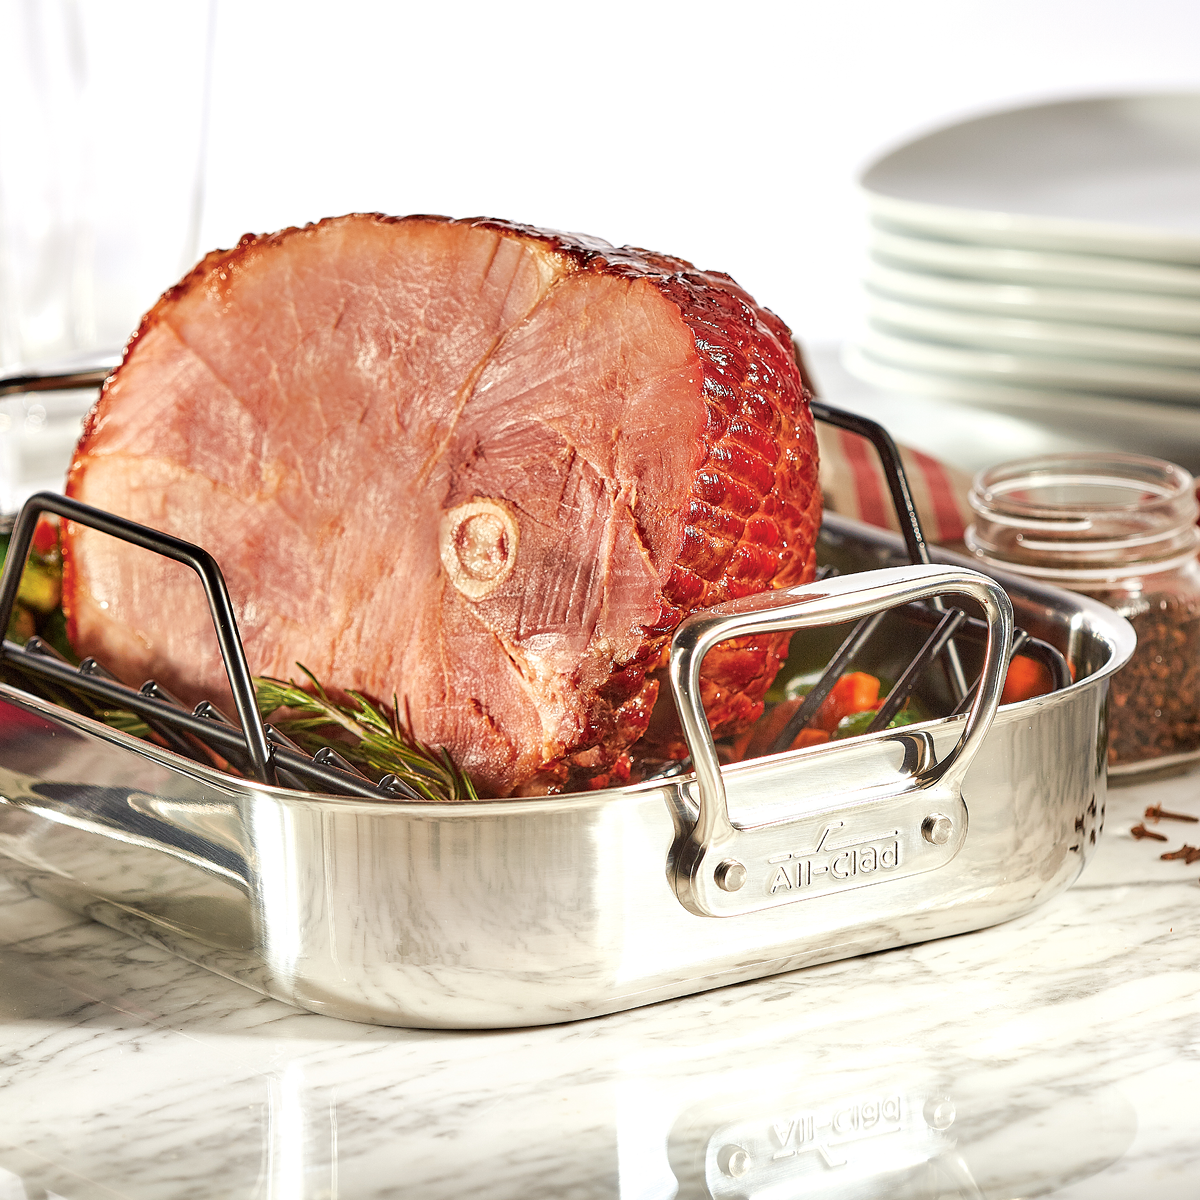 All-Clad Slashed Prices of Its Stainless Steel Roasting Pans Almost 40% Of  at